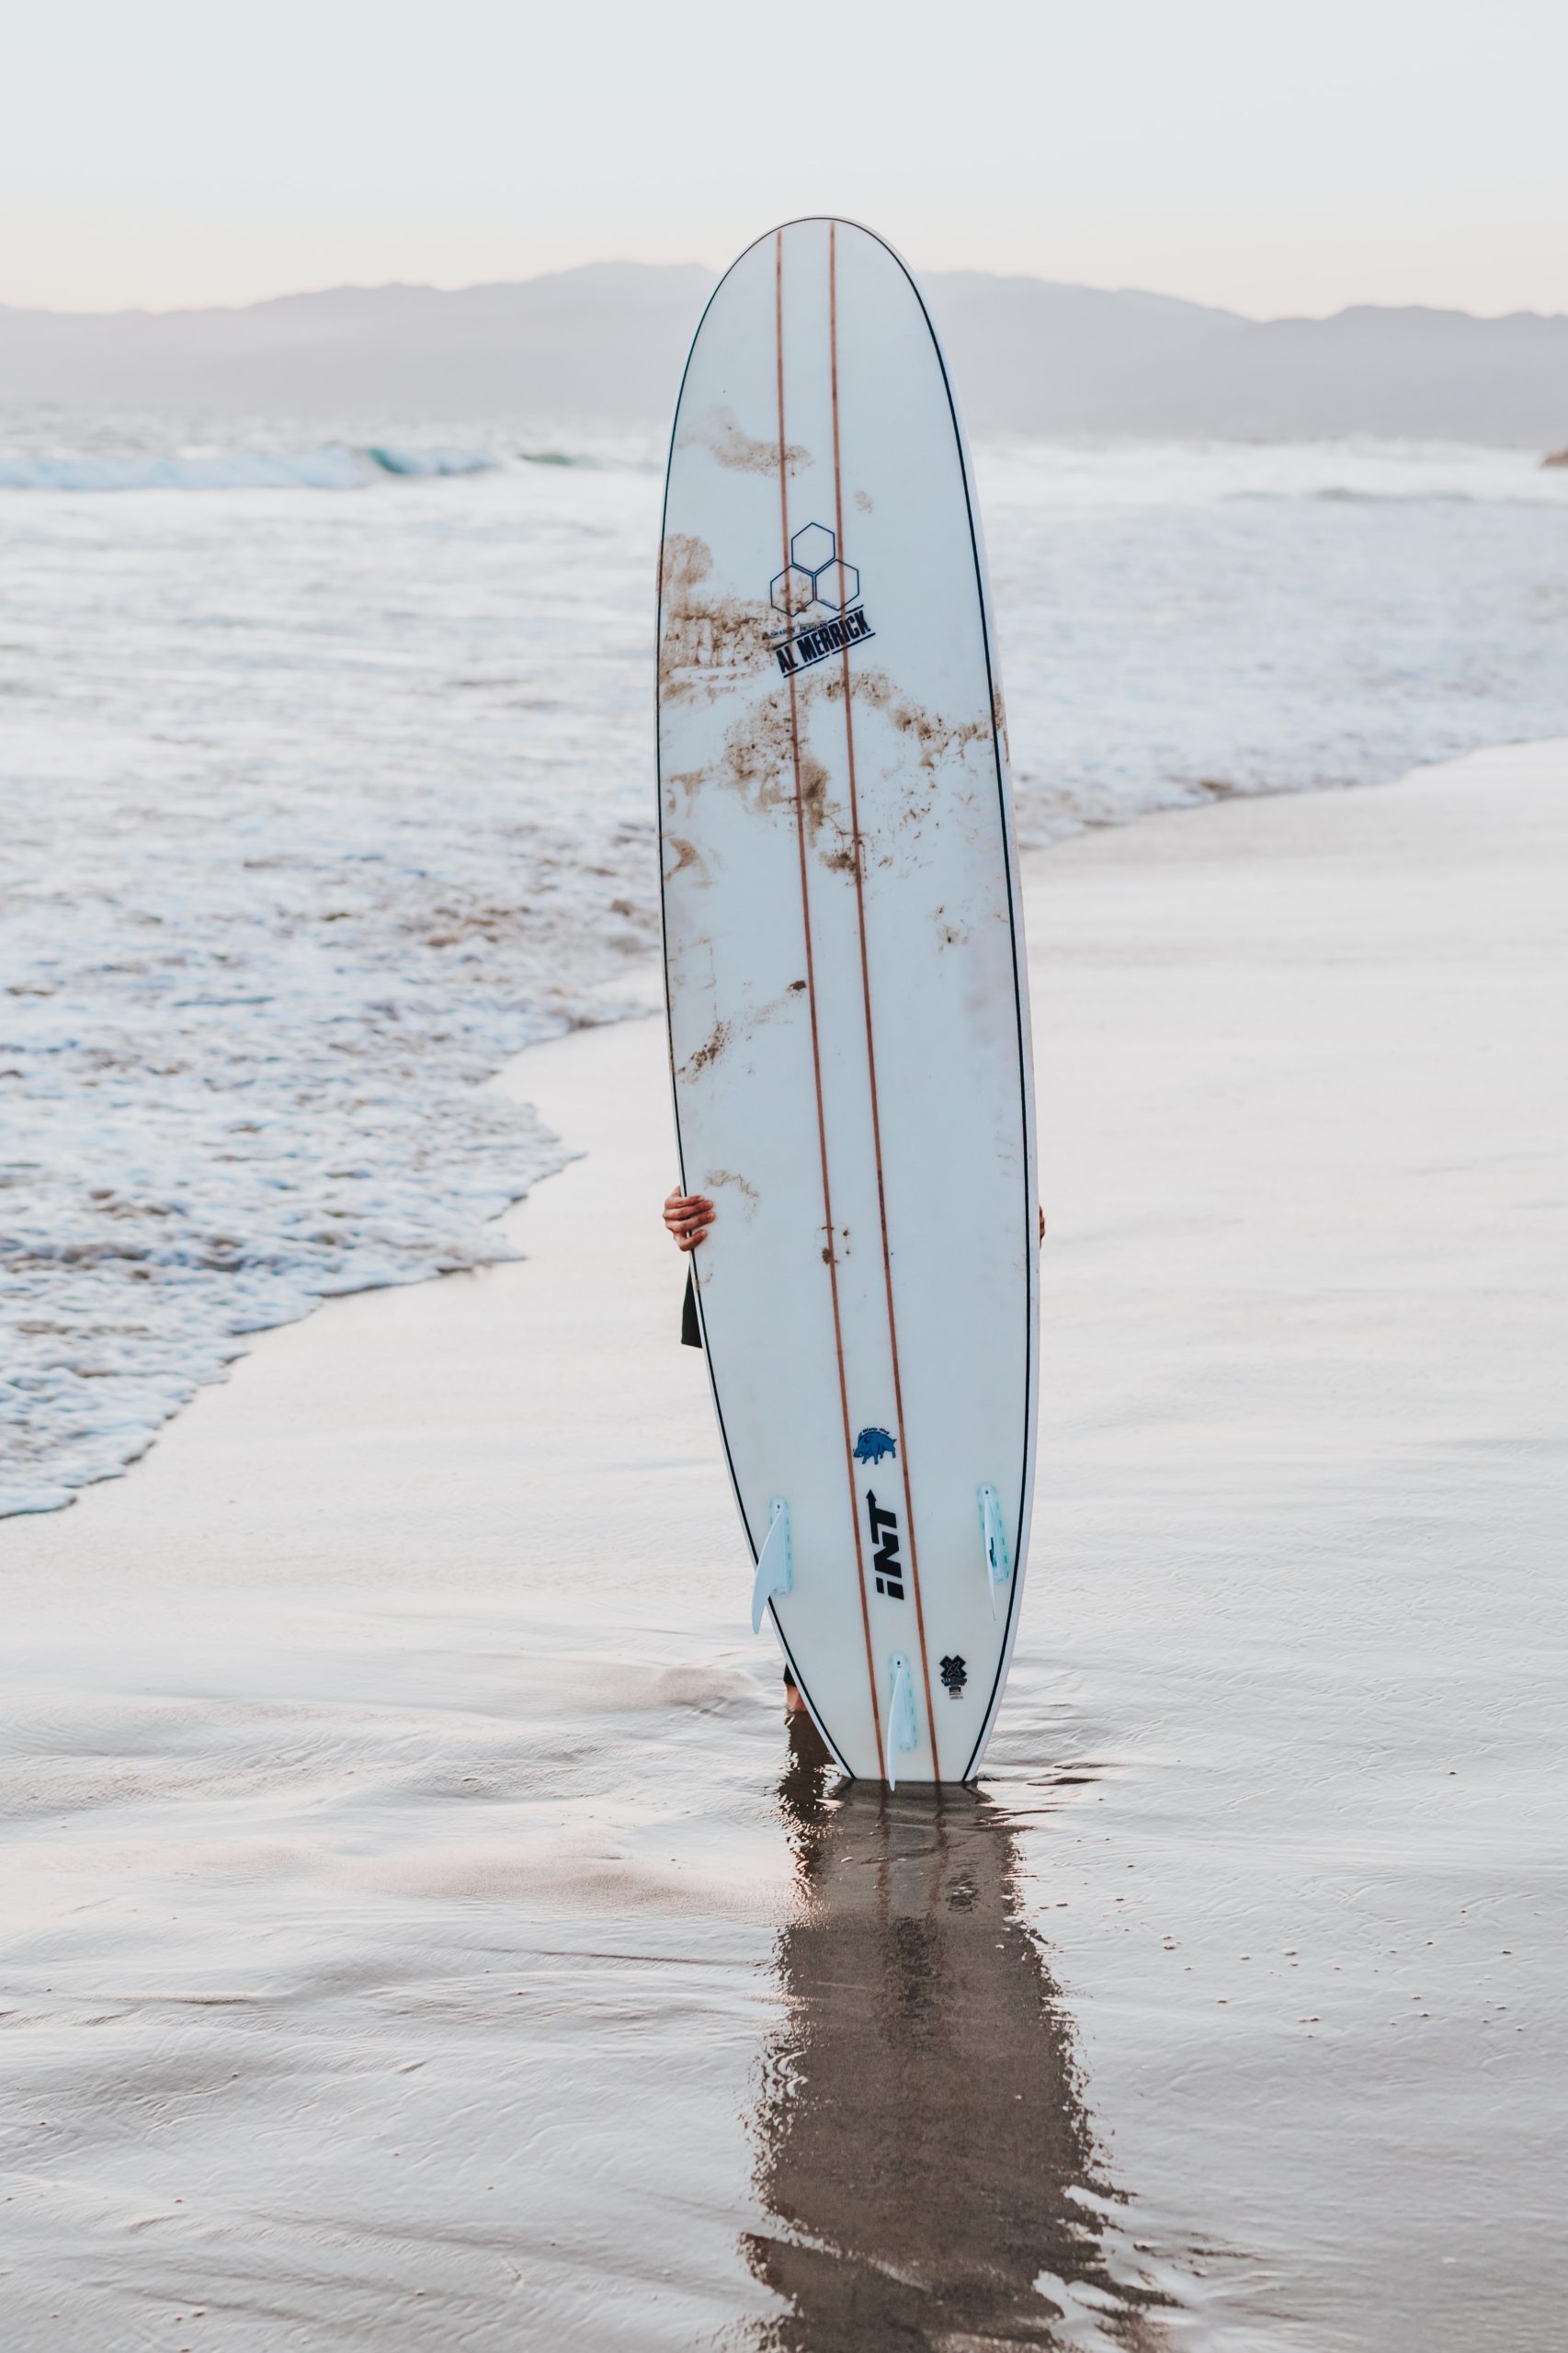 Photo of surf board standing upright on beach.